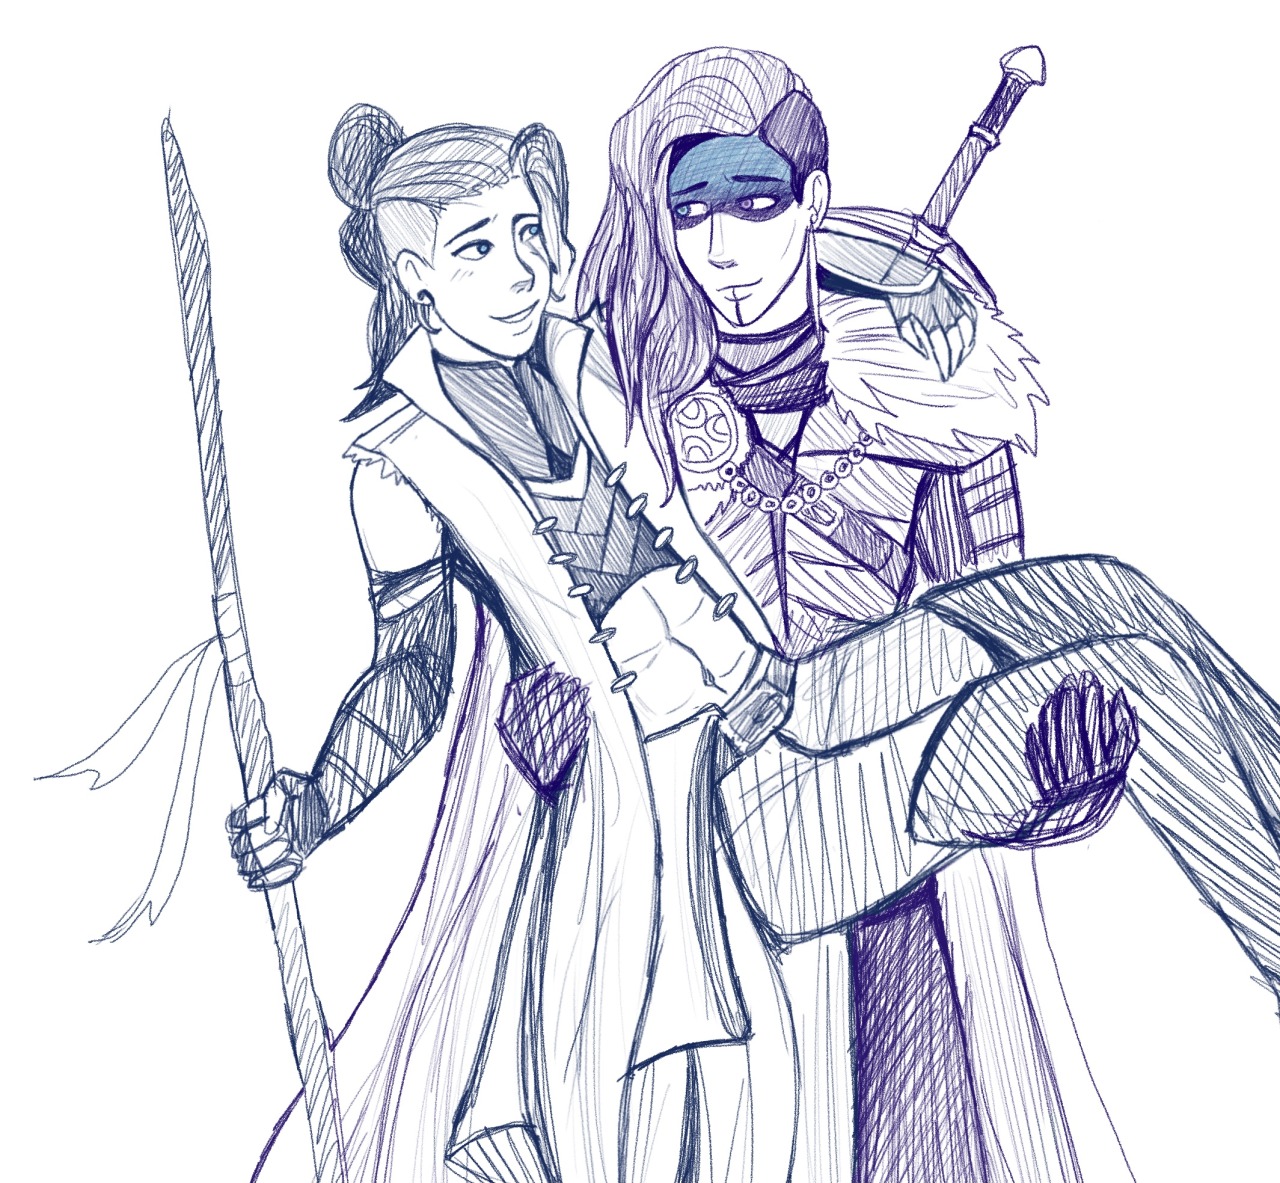 Beauyasha sketching while I catch up on critical role 